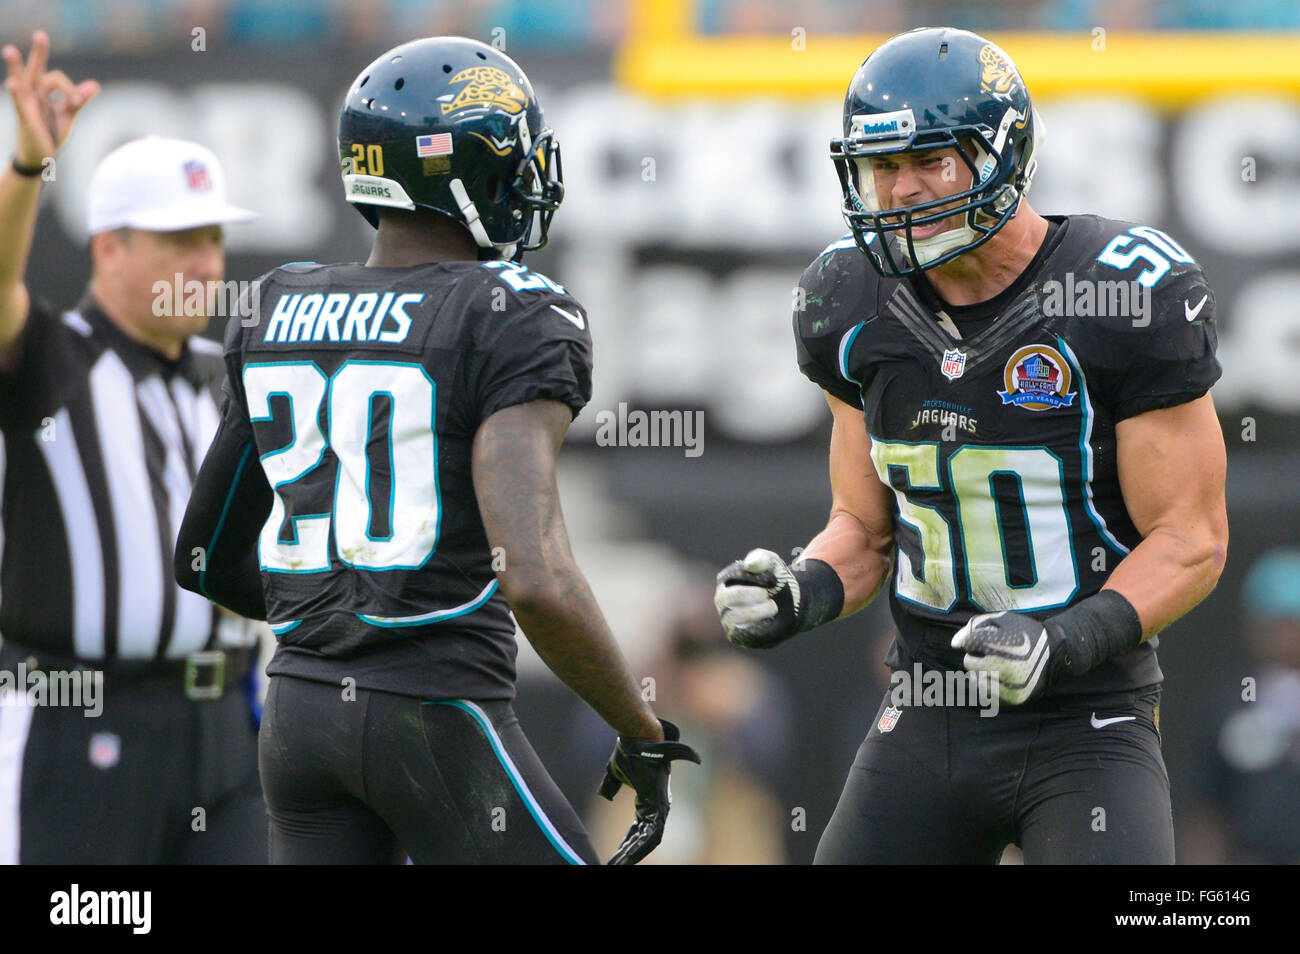 Jacksonville, FL, USA. 9th Dec, 2012. Jacksonville Jaguars outside linebacker Russell Allen (50) during an NFL game against the New York Jets at EverBank Field on Dec 9, 2012 in Jacksonville, Florida. The Jets won 17-10.ZUMA Press/Scott A. Miller. © Scott A. Miller/ZUMA Wire/Alamy Live News Stock Photo